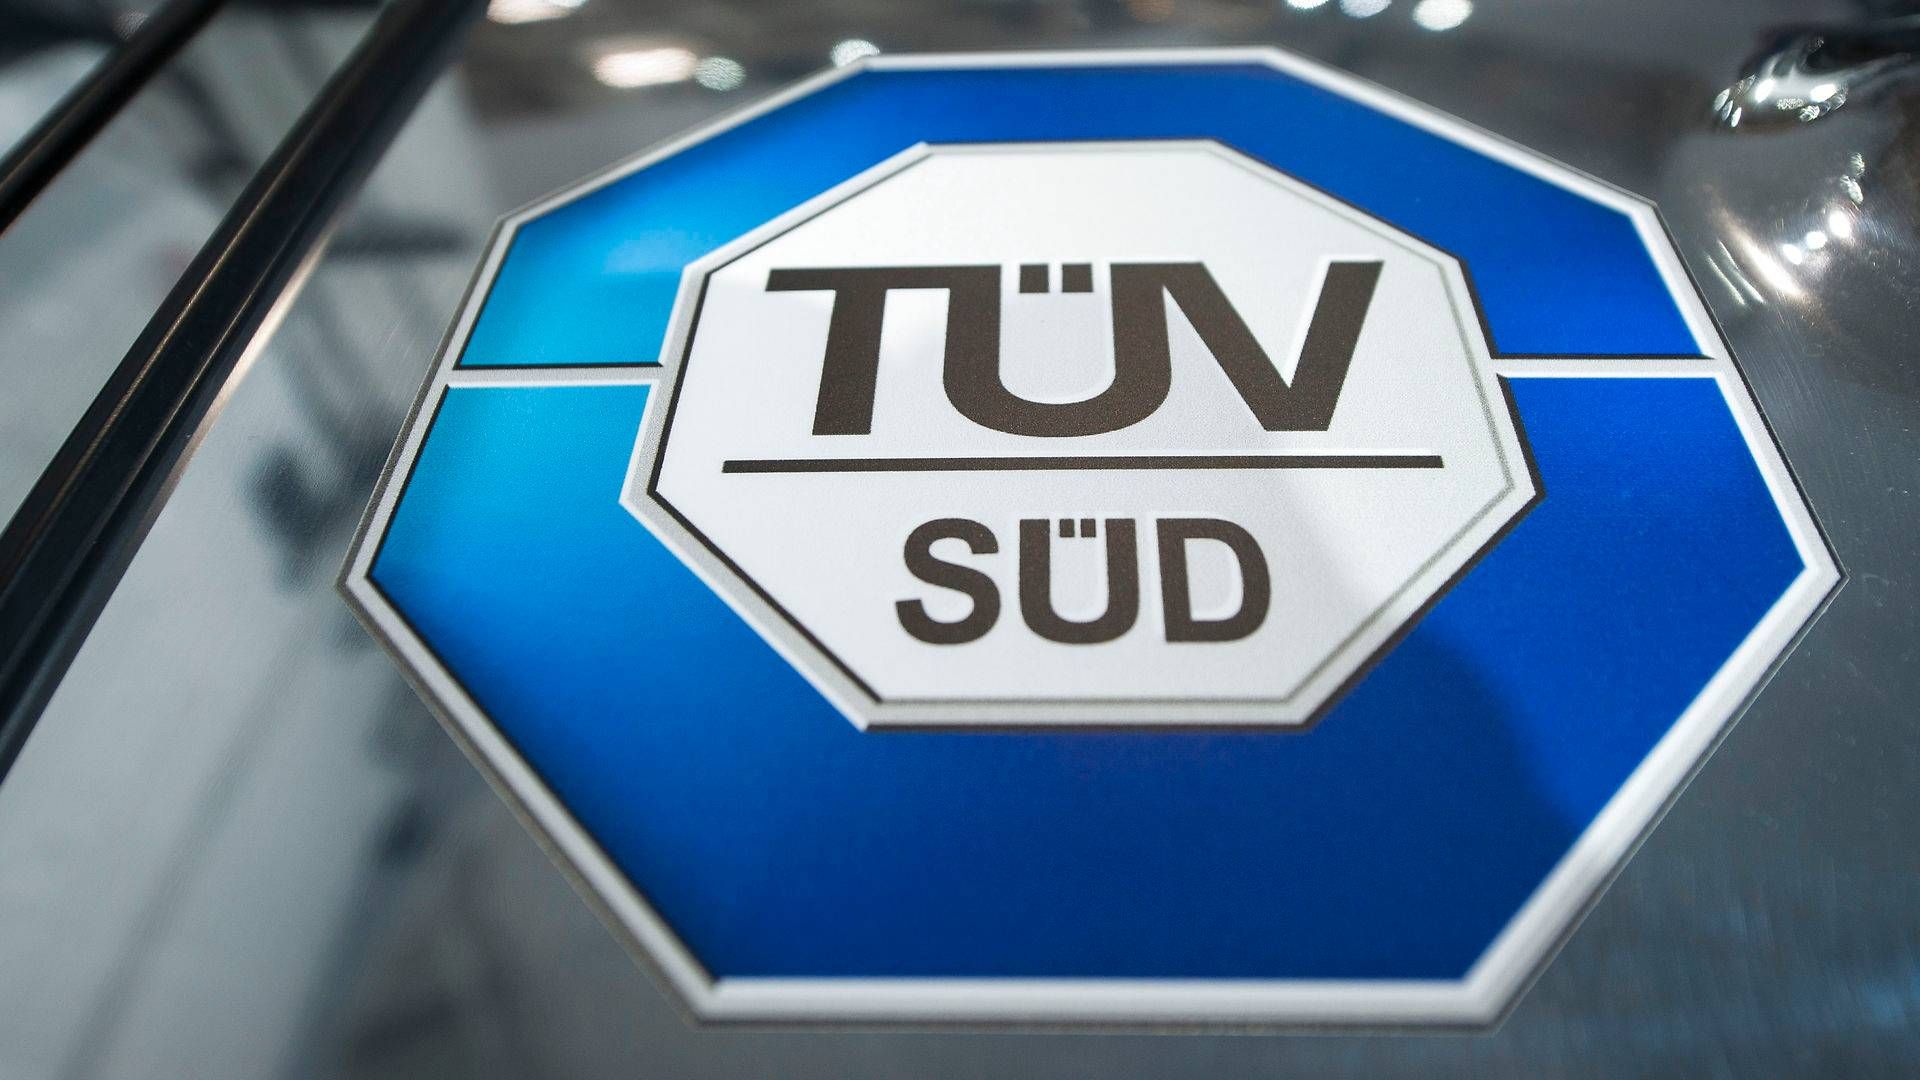 German Tüv Süd continues to be the only applicant to become a notified body in Denmark